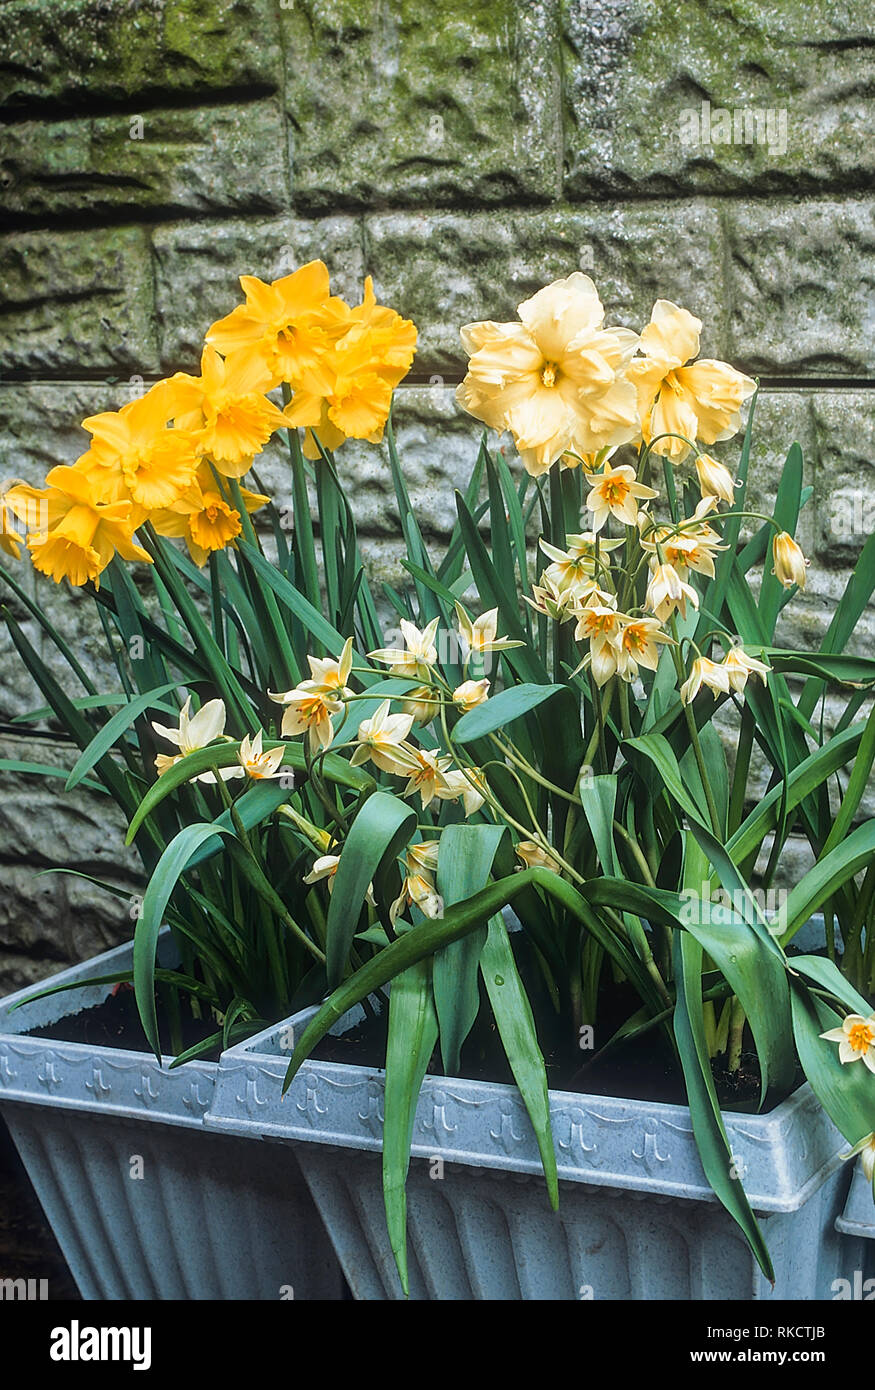 Tulip Turkestanica with Narcissus Cassata and King Alfred growing in flower tubs against a garden wall   Perennial spring flowering bulbs Stock Photo